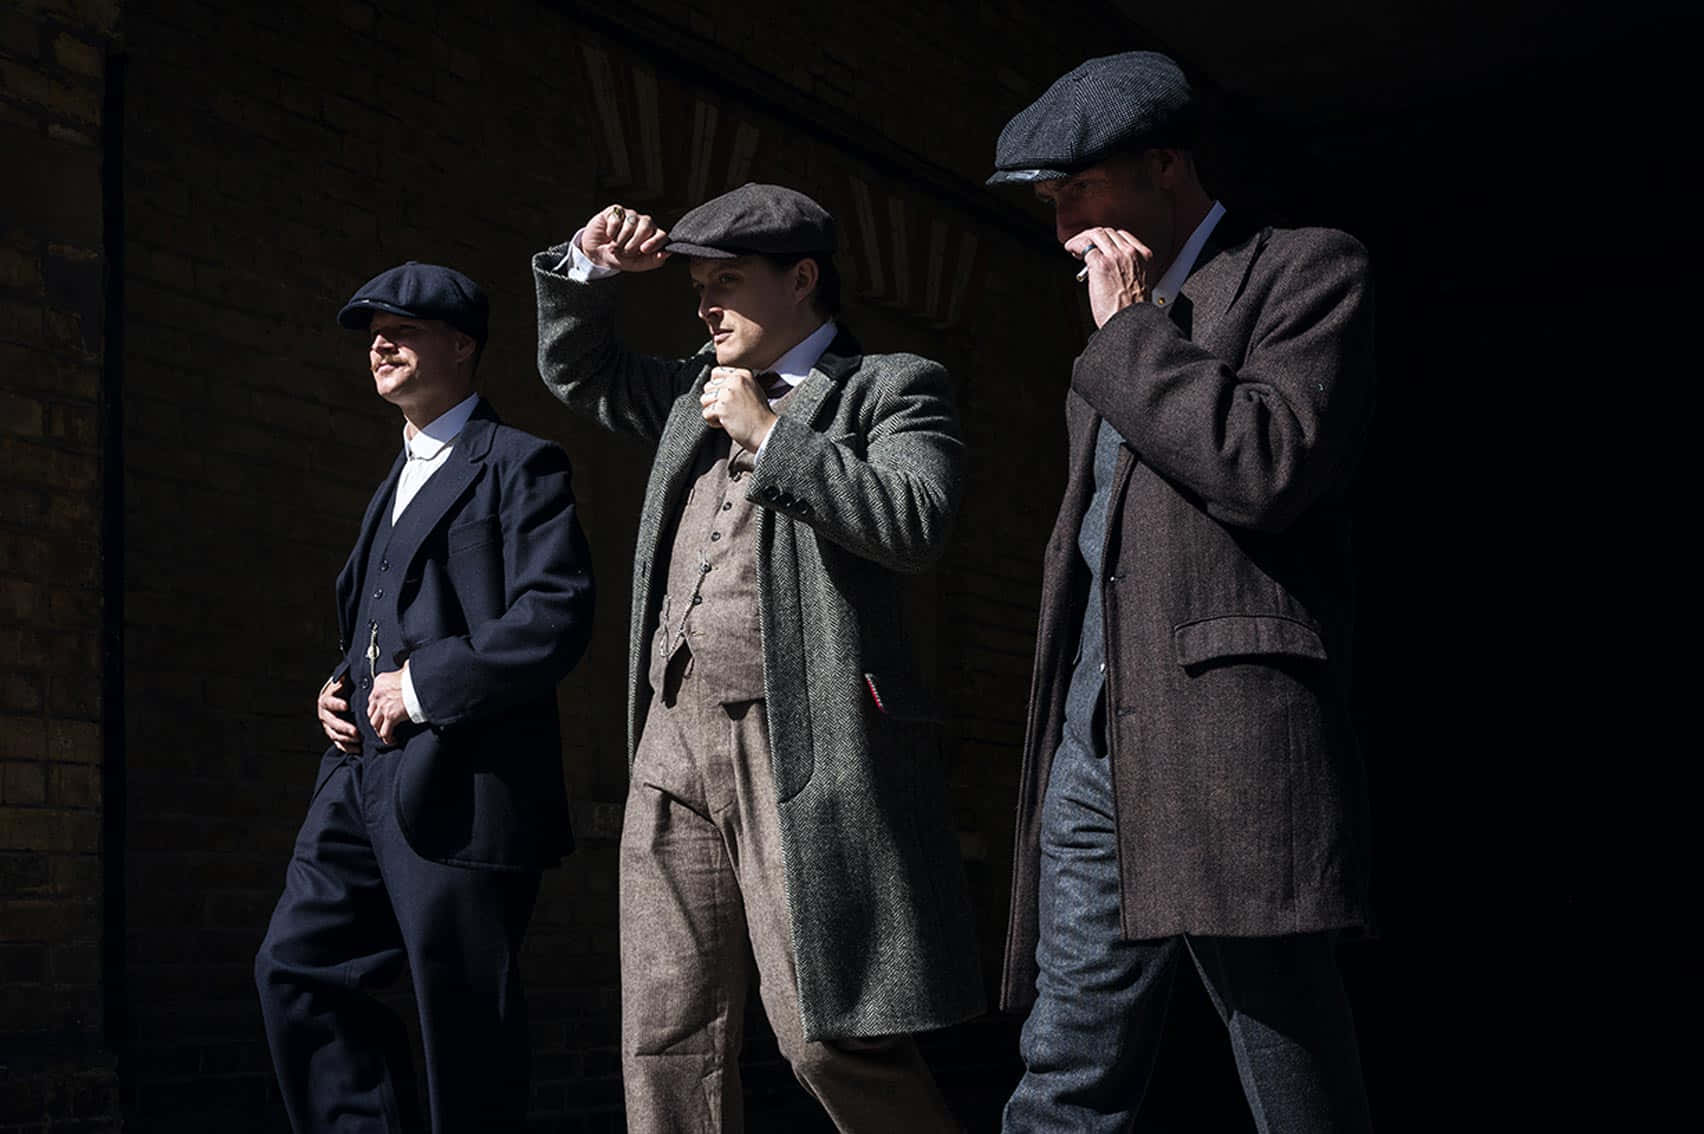 Peaky Blinders cast ready for another explosive episode